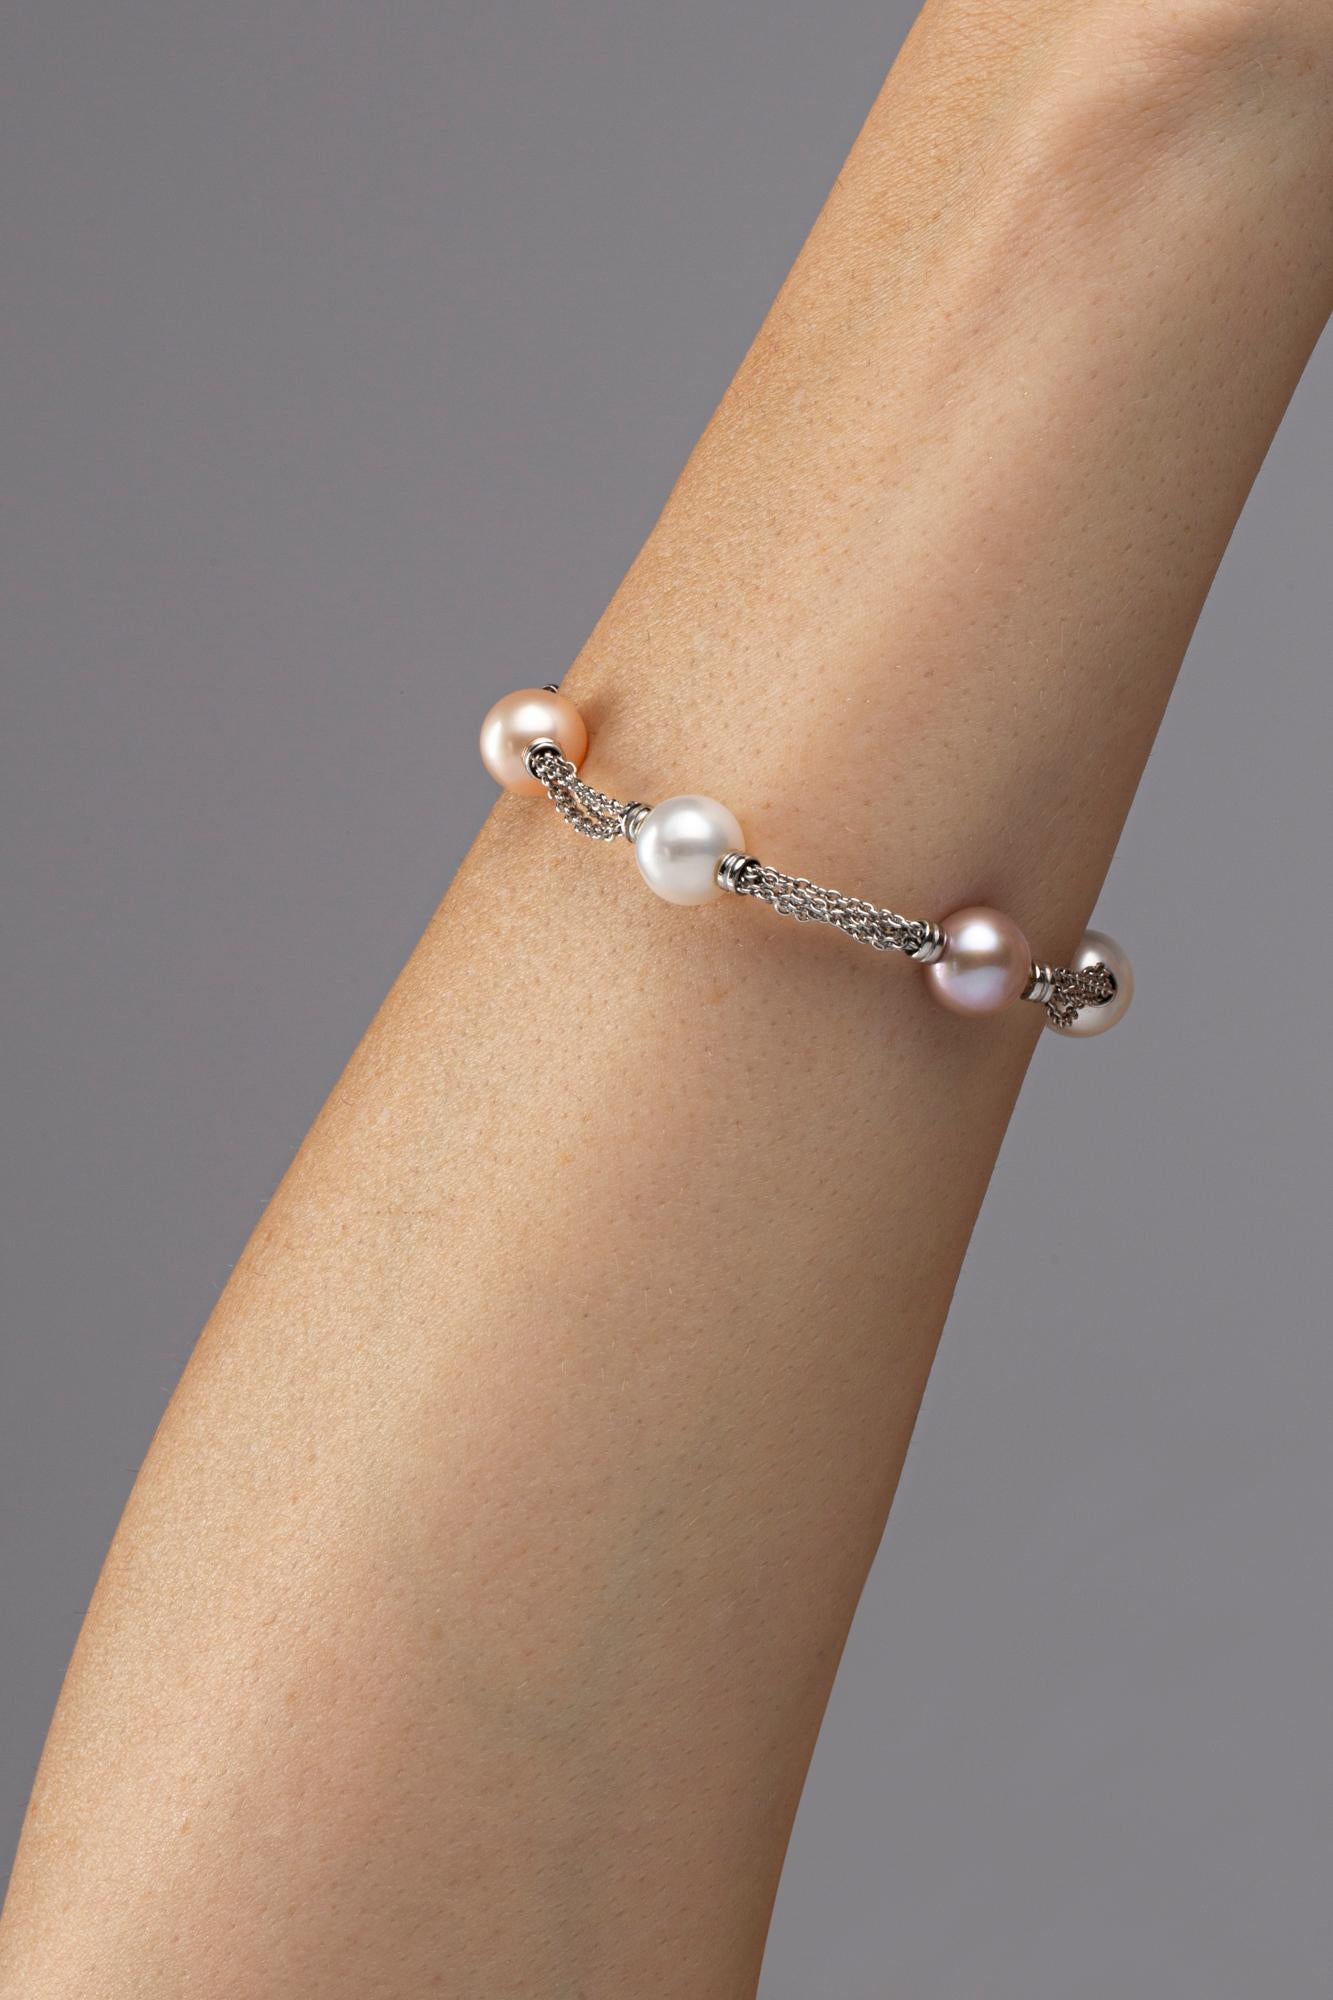 Alex Jona design collection, hand crafted in Italy, 18 karat white gold chain bracelet, alternating white and pink Japanese Akoya pearls.

Alex Jona jewels stand out, not only for their special design and for the excellent quality of the gemstones,